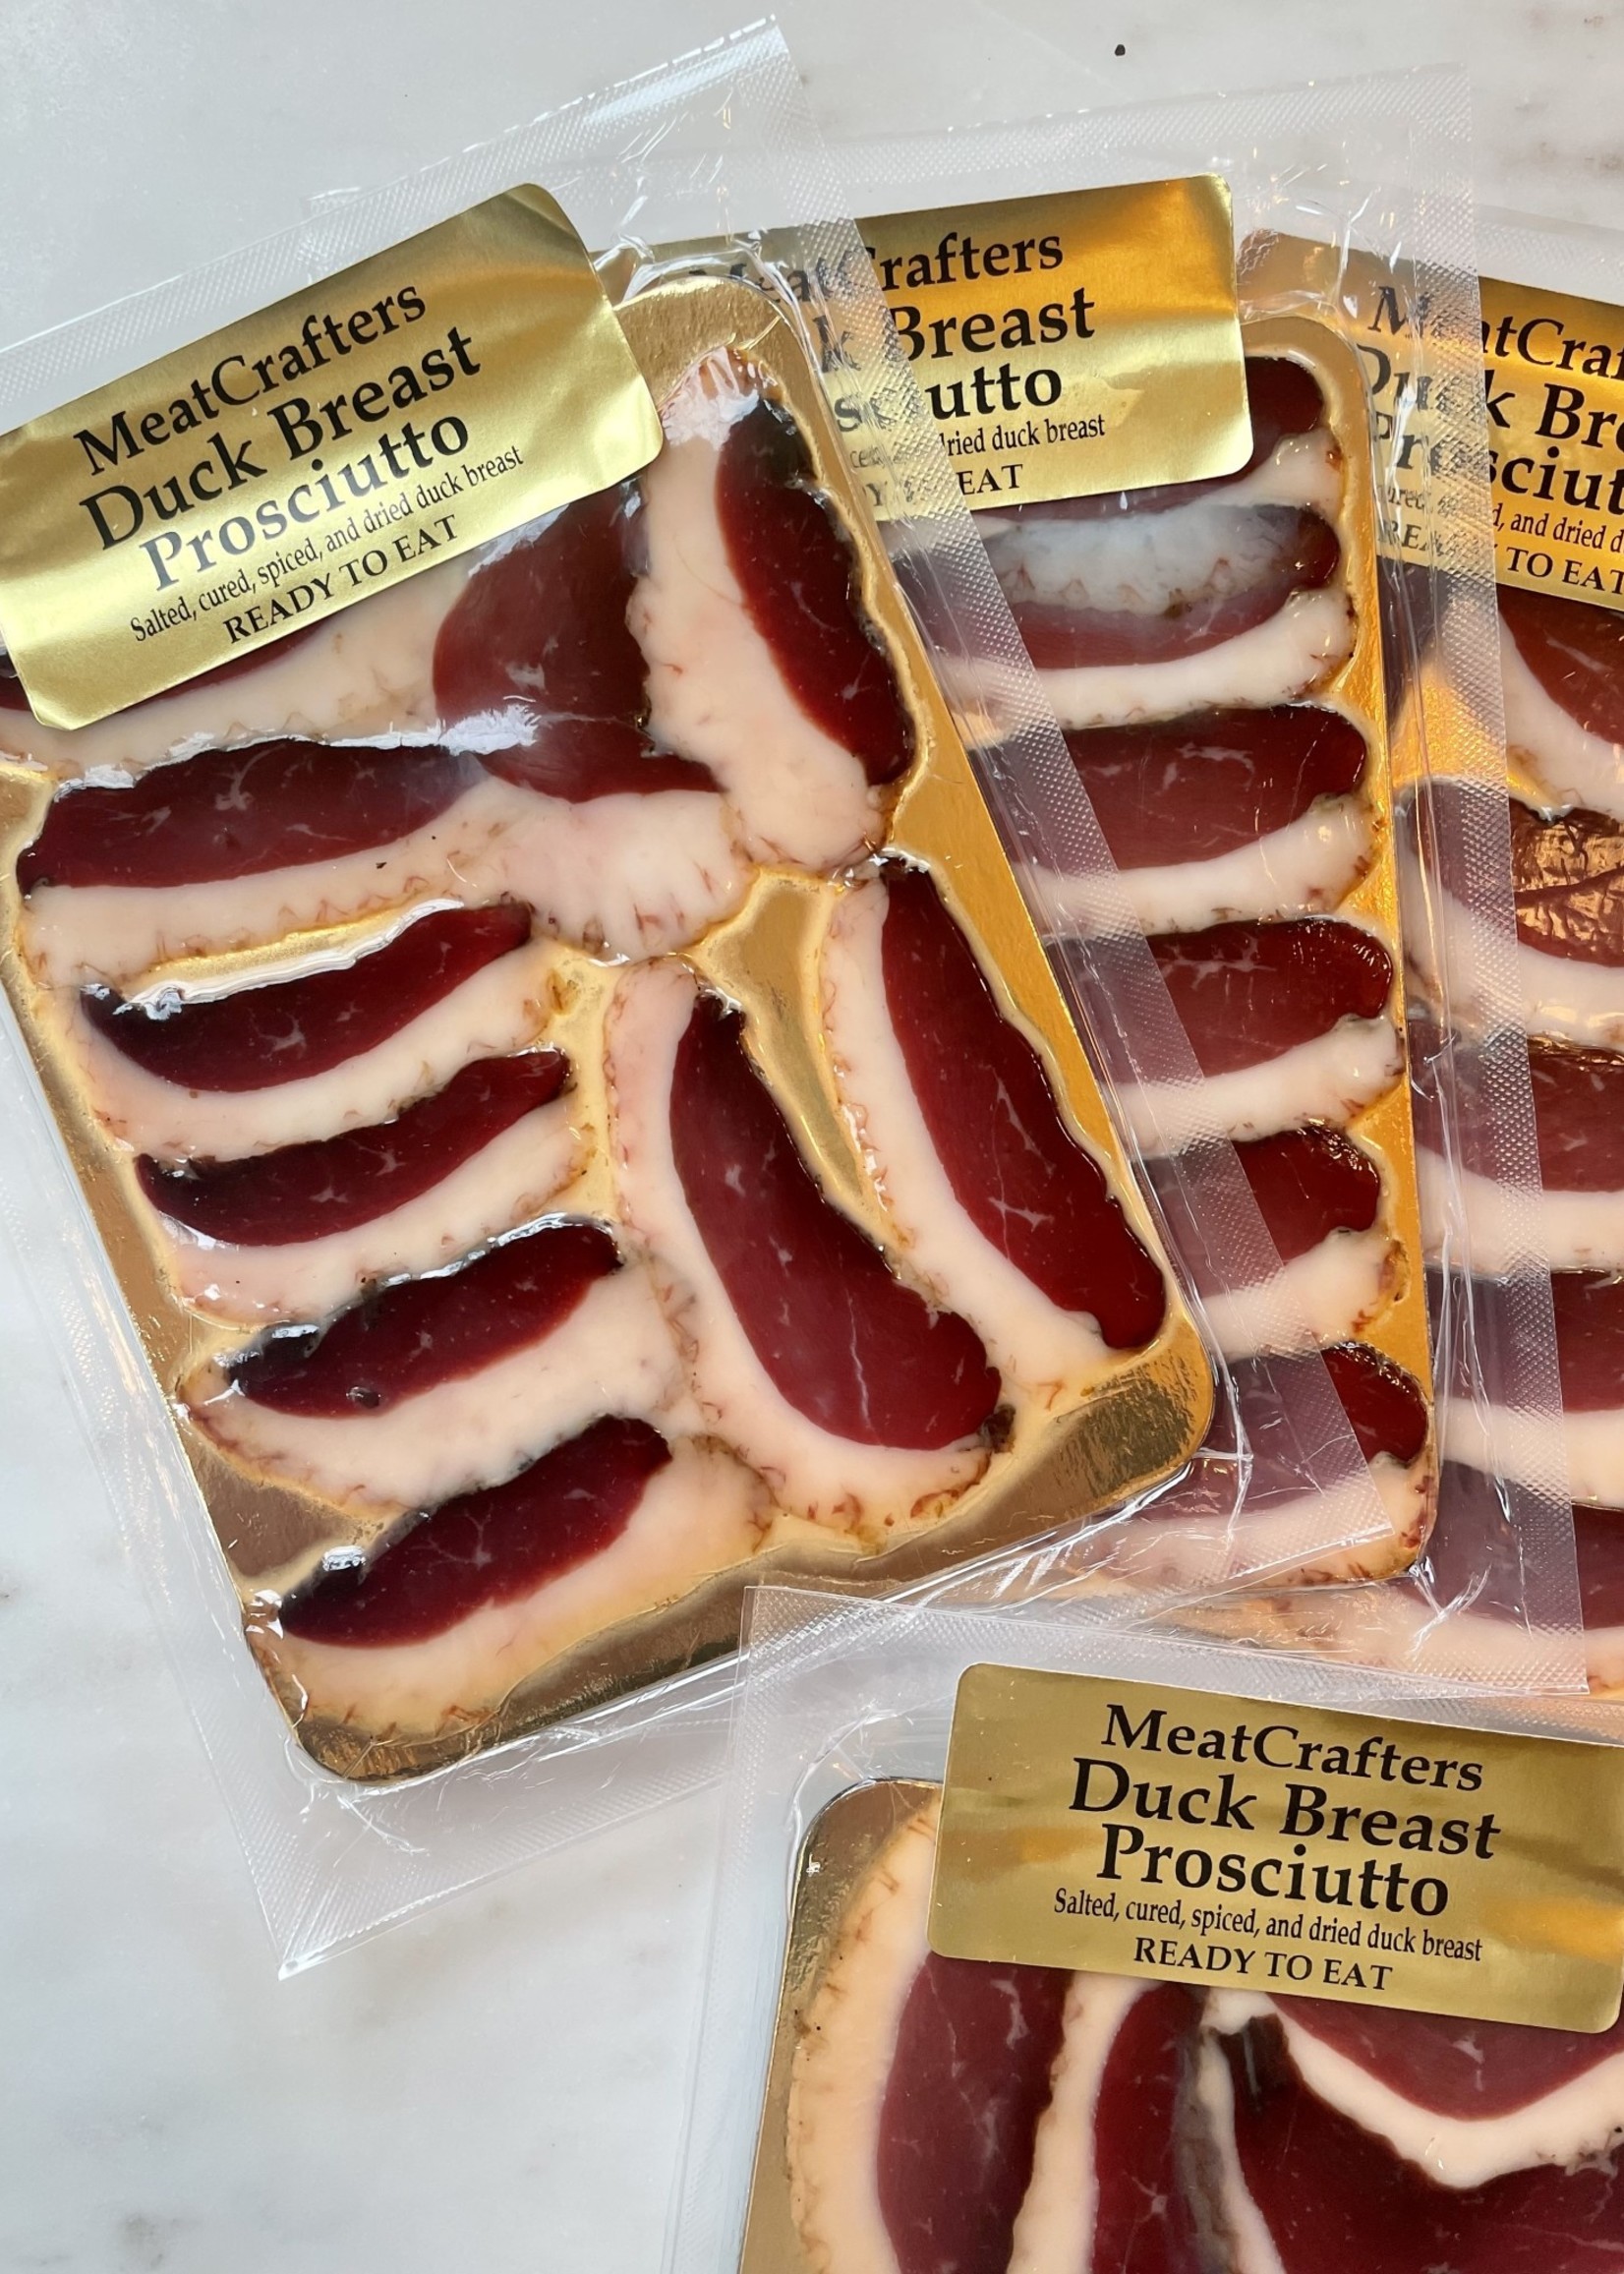 Meat Crafters Sliced Duck Breast Prosciutto